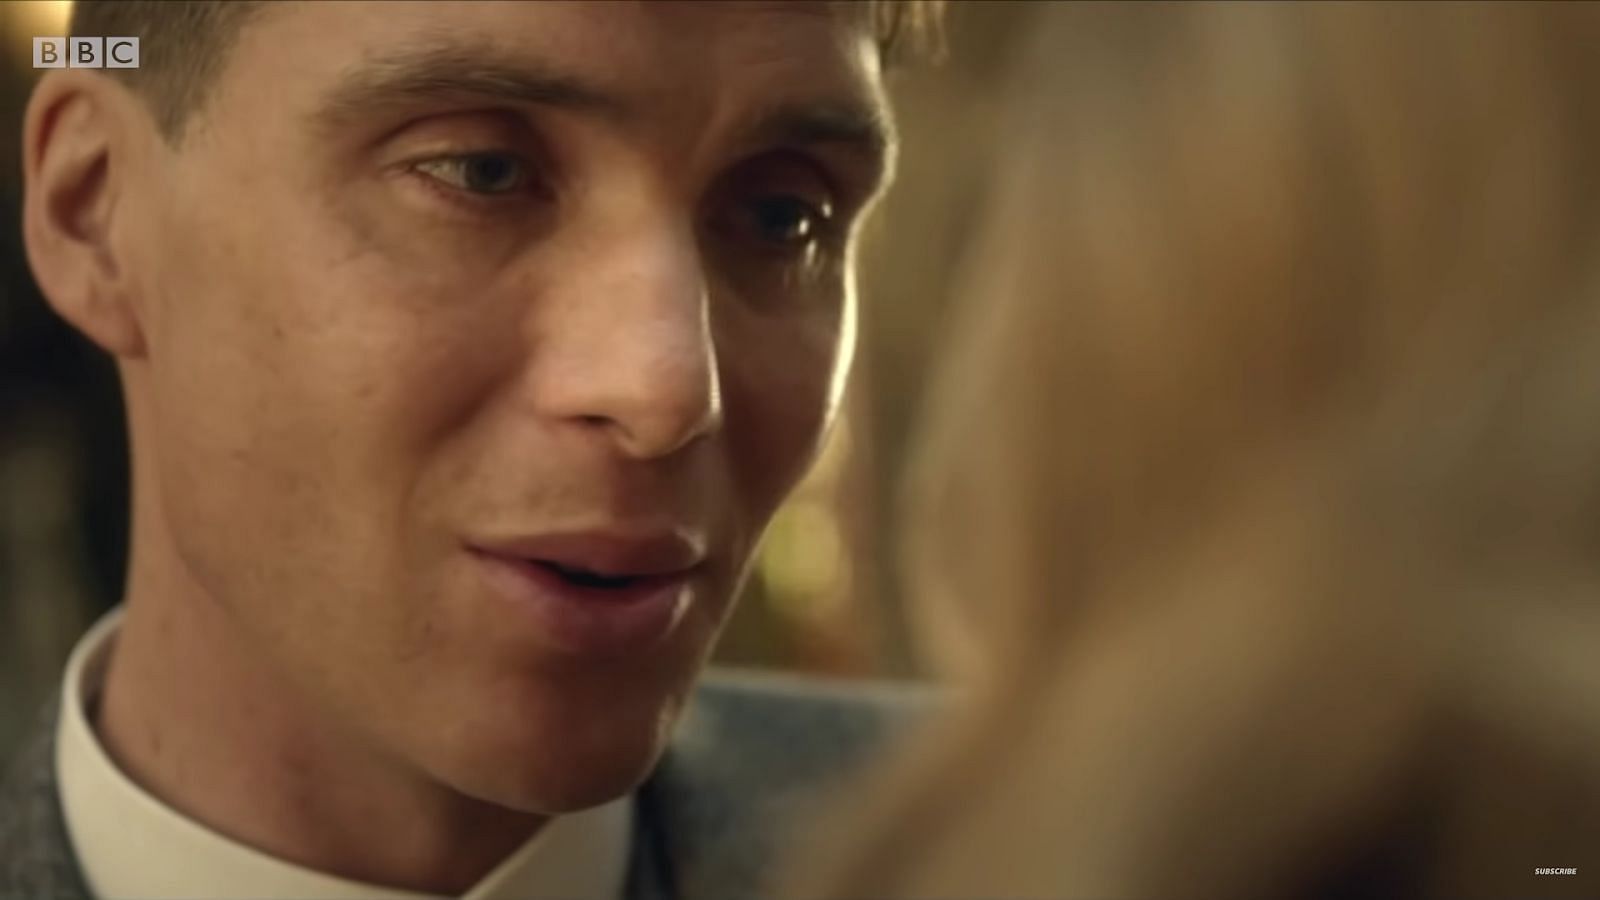 What is Cillian Murphy known for?